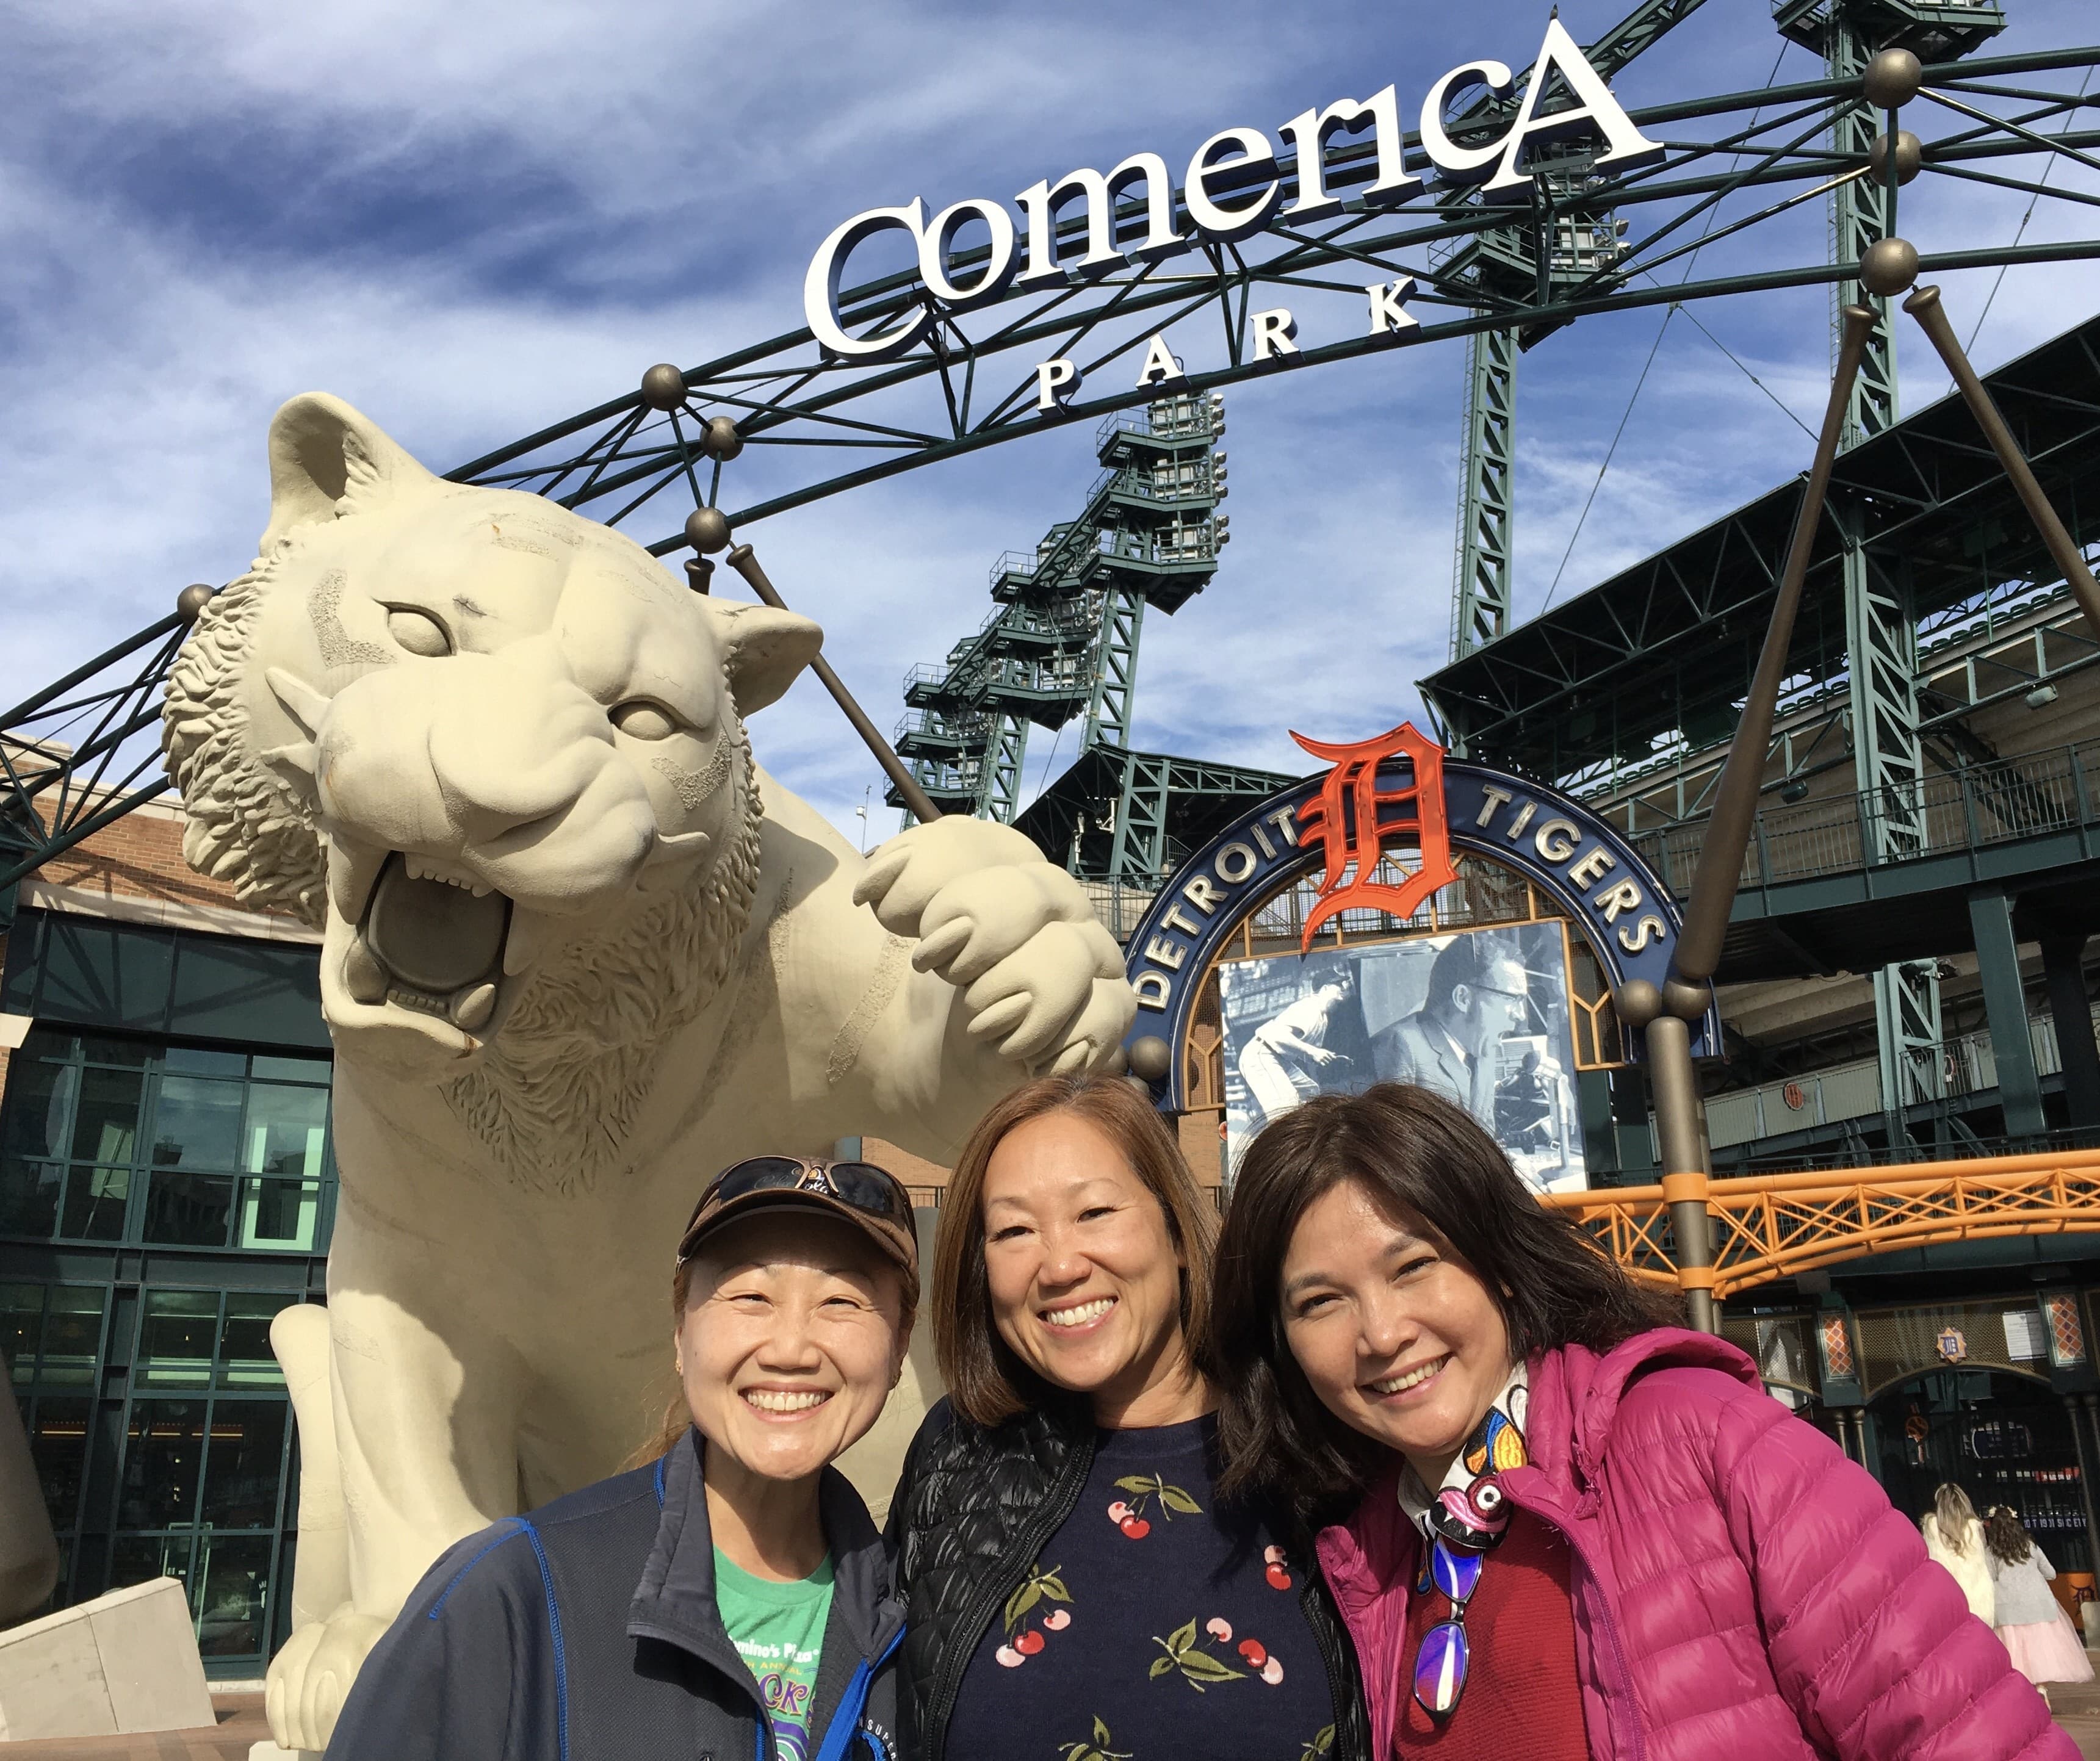 Tour guests visiting Detroit pose in front of the giant tiger outside of Comerica Park, home of the Detroit Tigers.